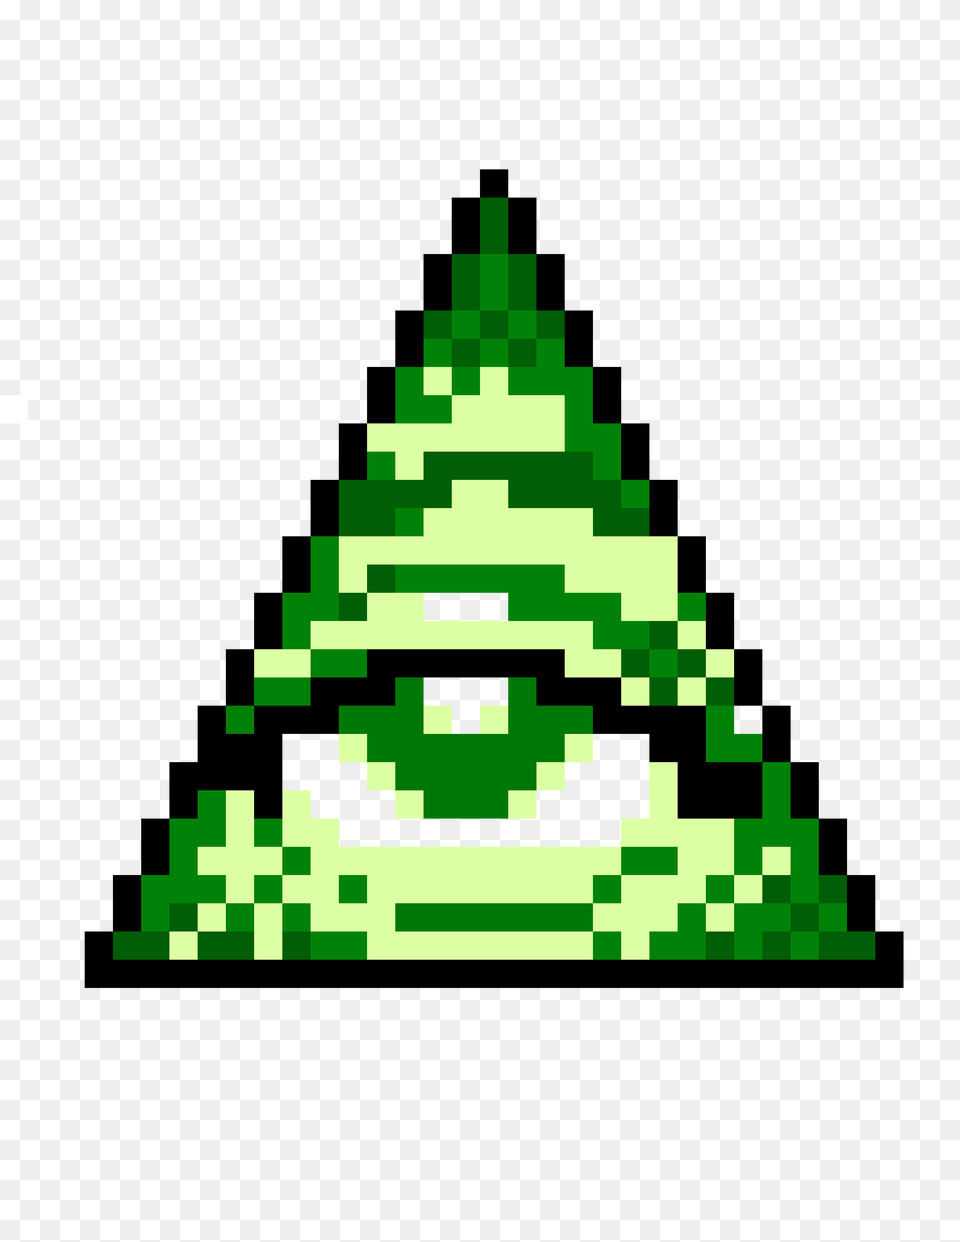 The All Seeing Eye Pixel Art Maker, Green, Triangle, Qr Code Png Image